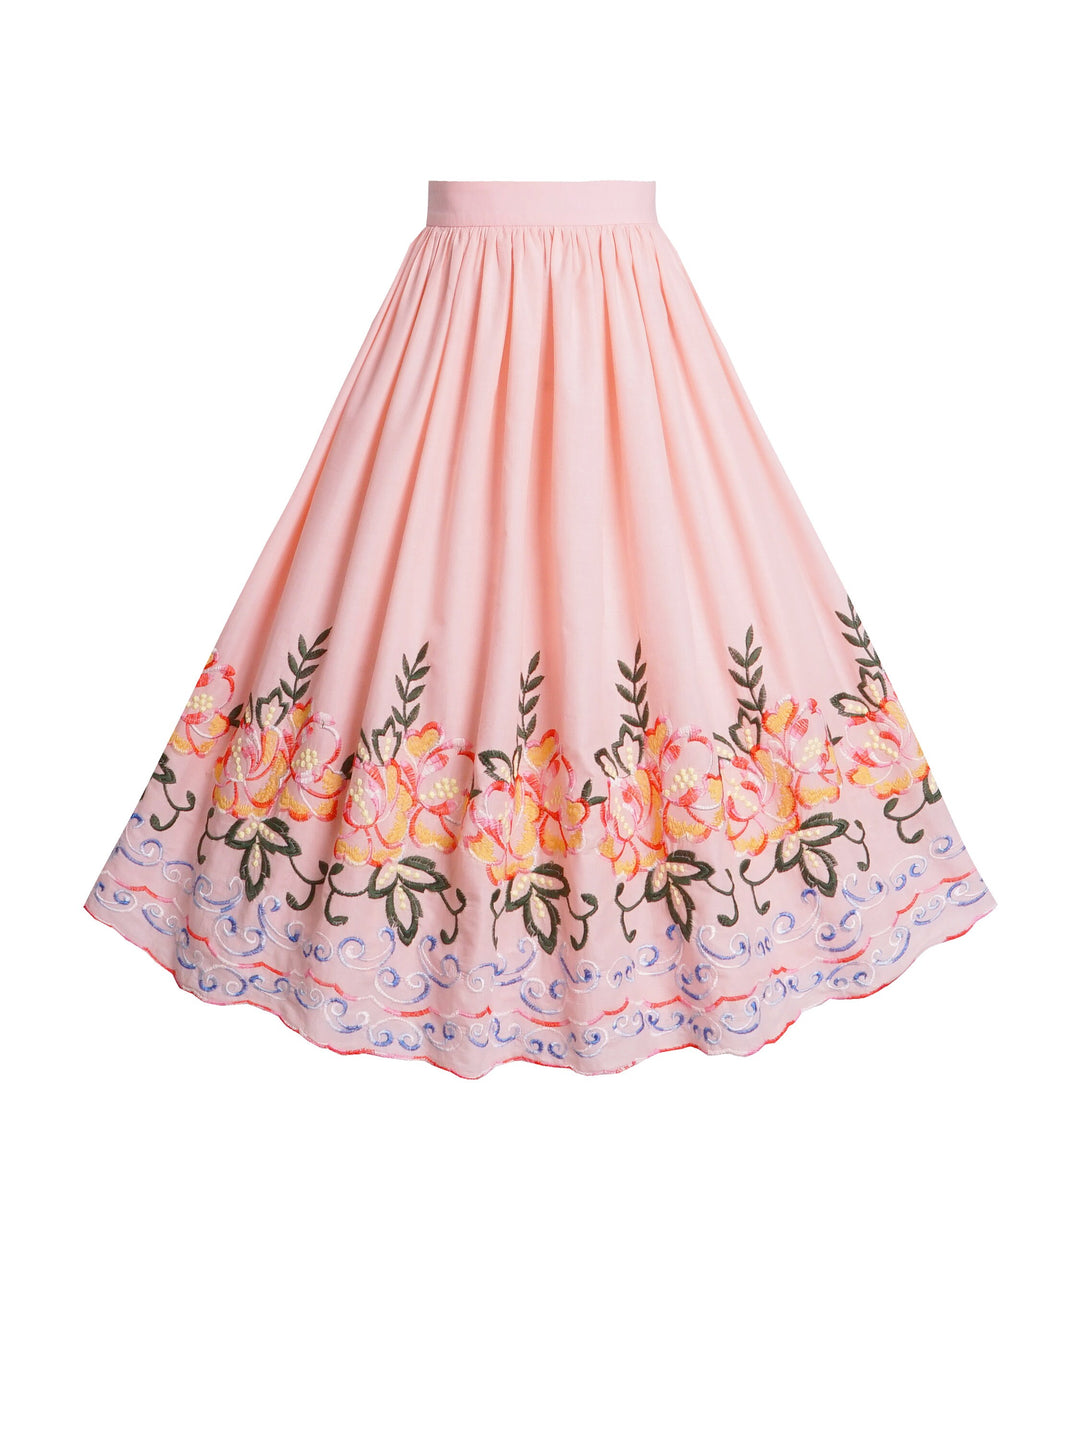 RTS - Size S - Lola Skirt Pink "Garden of your Dreams"